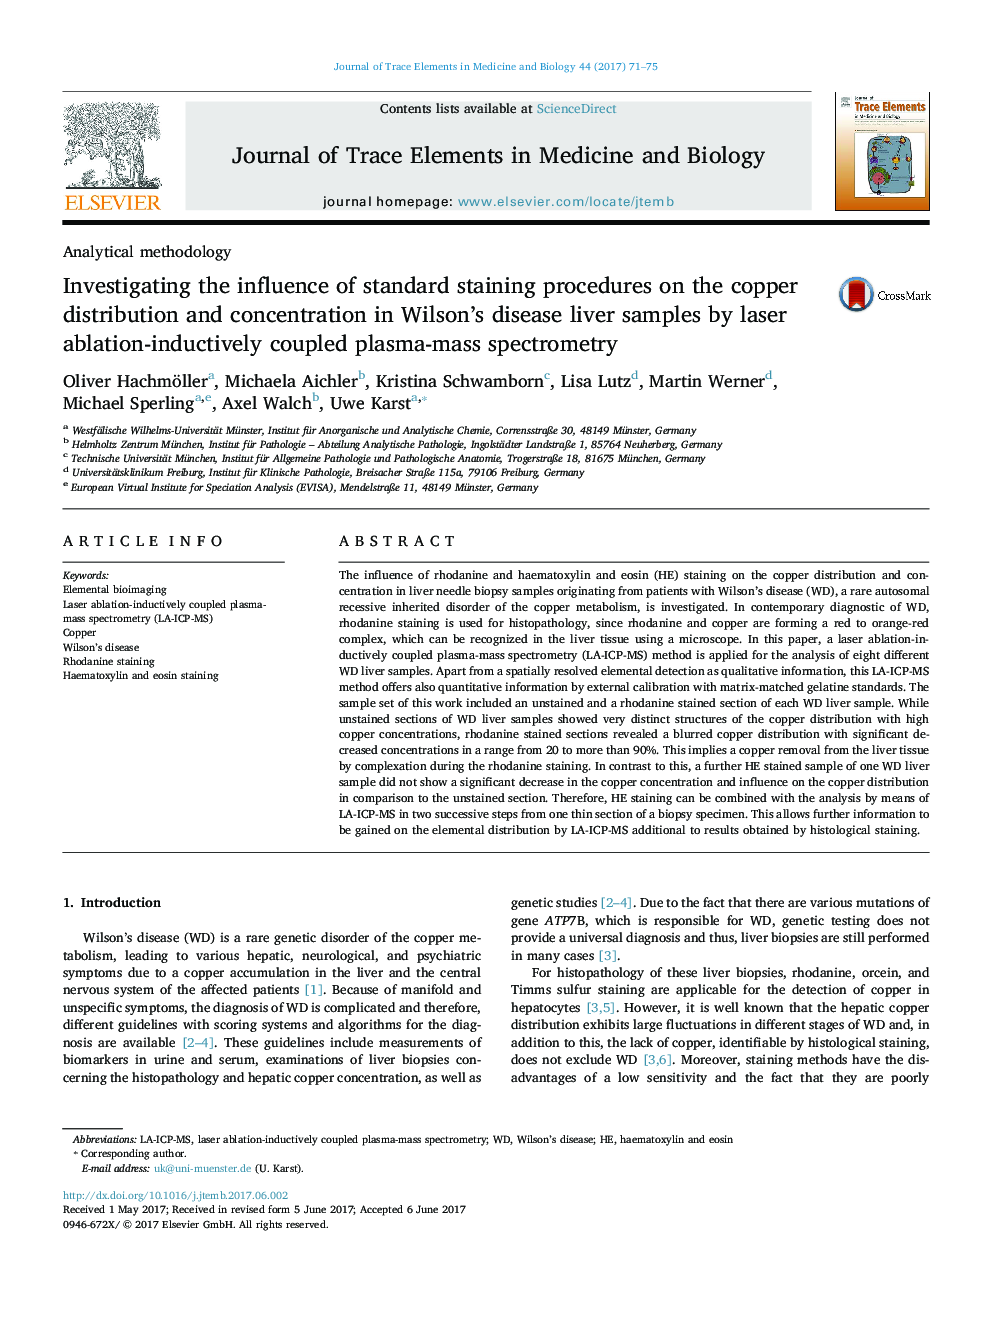 Investigating the influence of standard staining procedures on the copper distribution and concentration in Wilson's disease liver samples by laser ablation-inductively coupled plasma-mass spectrometry